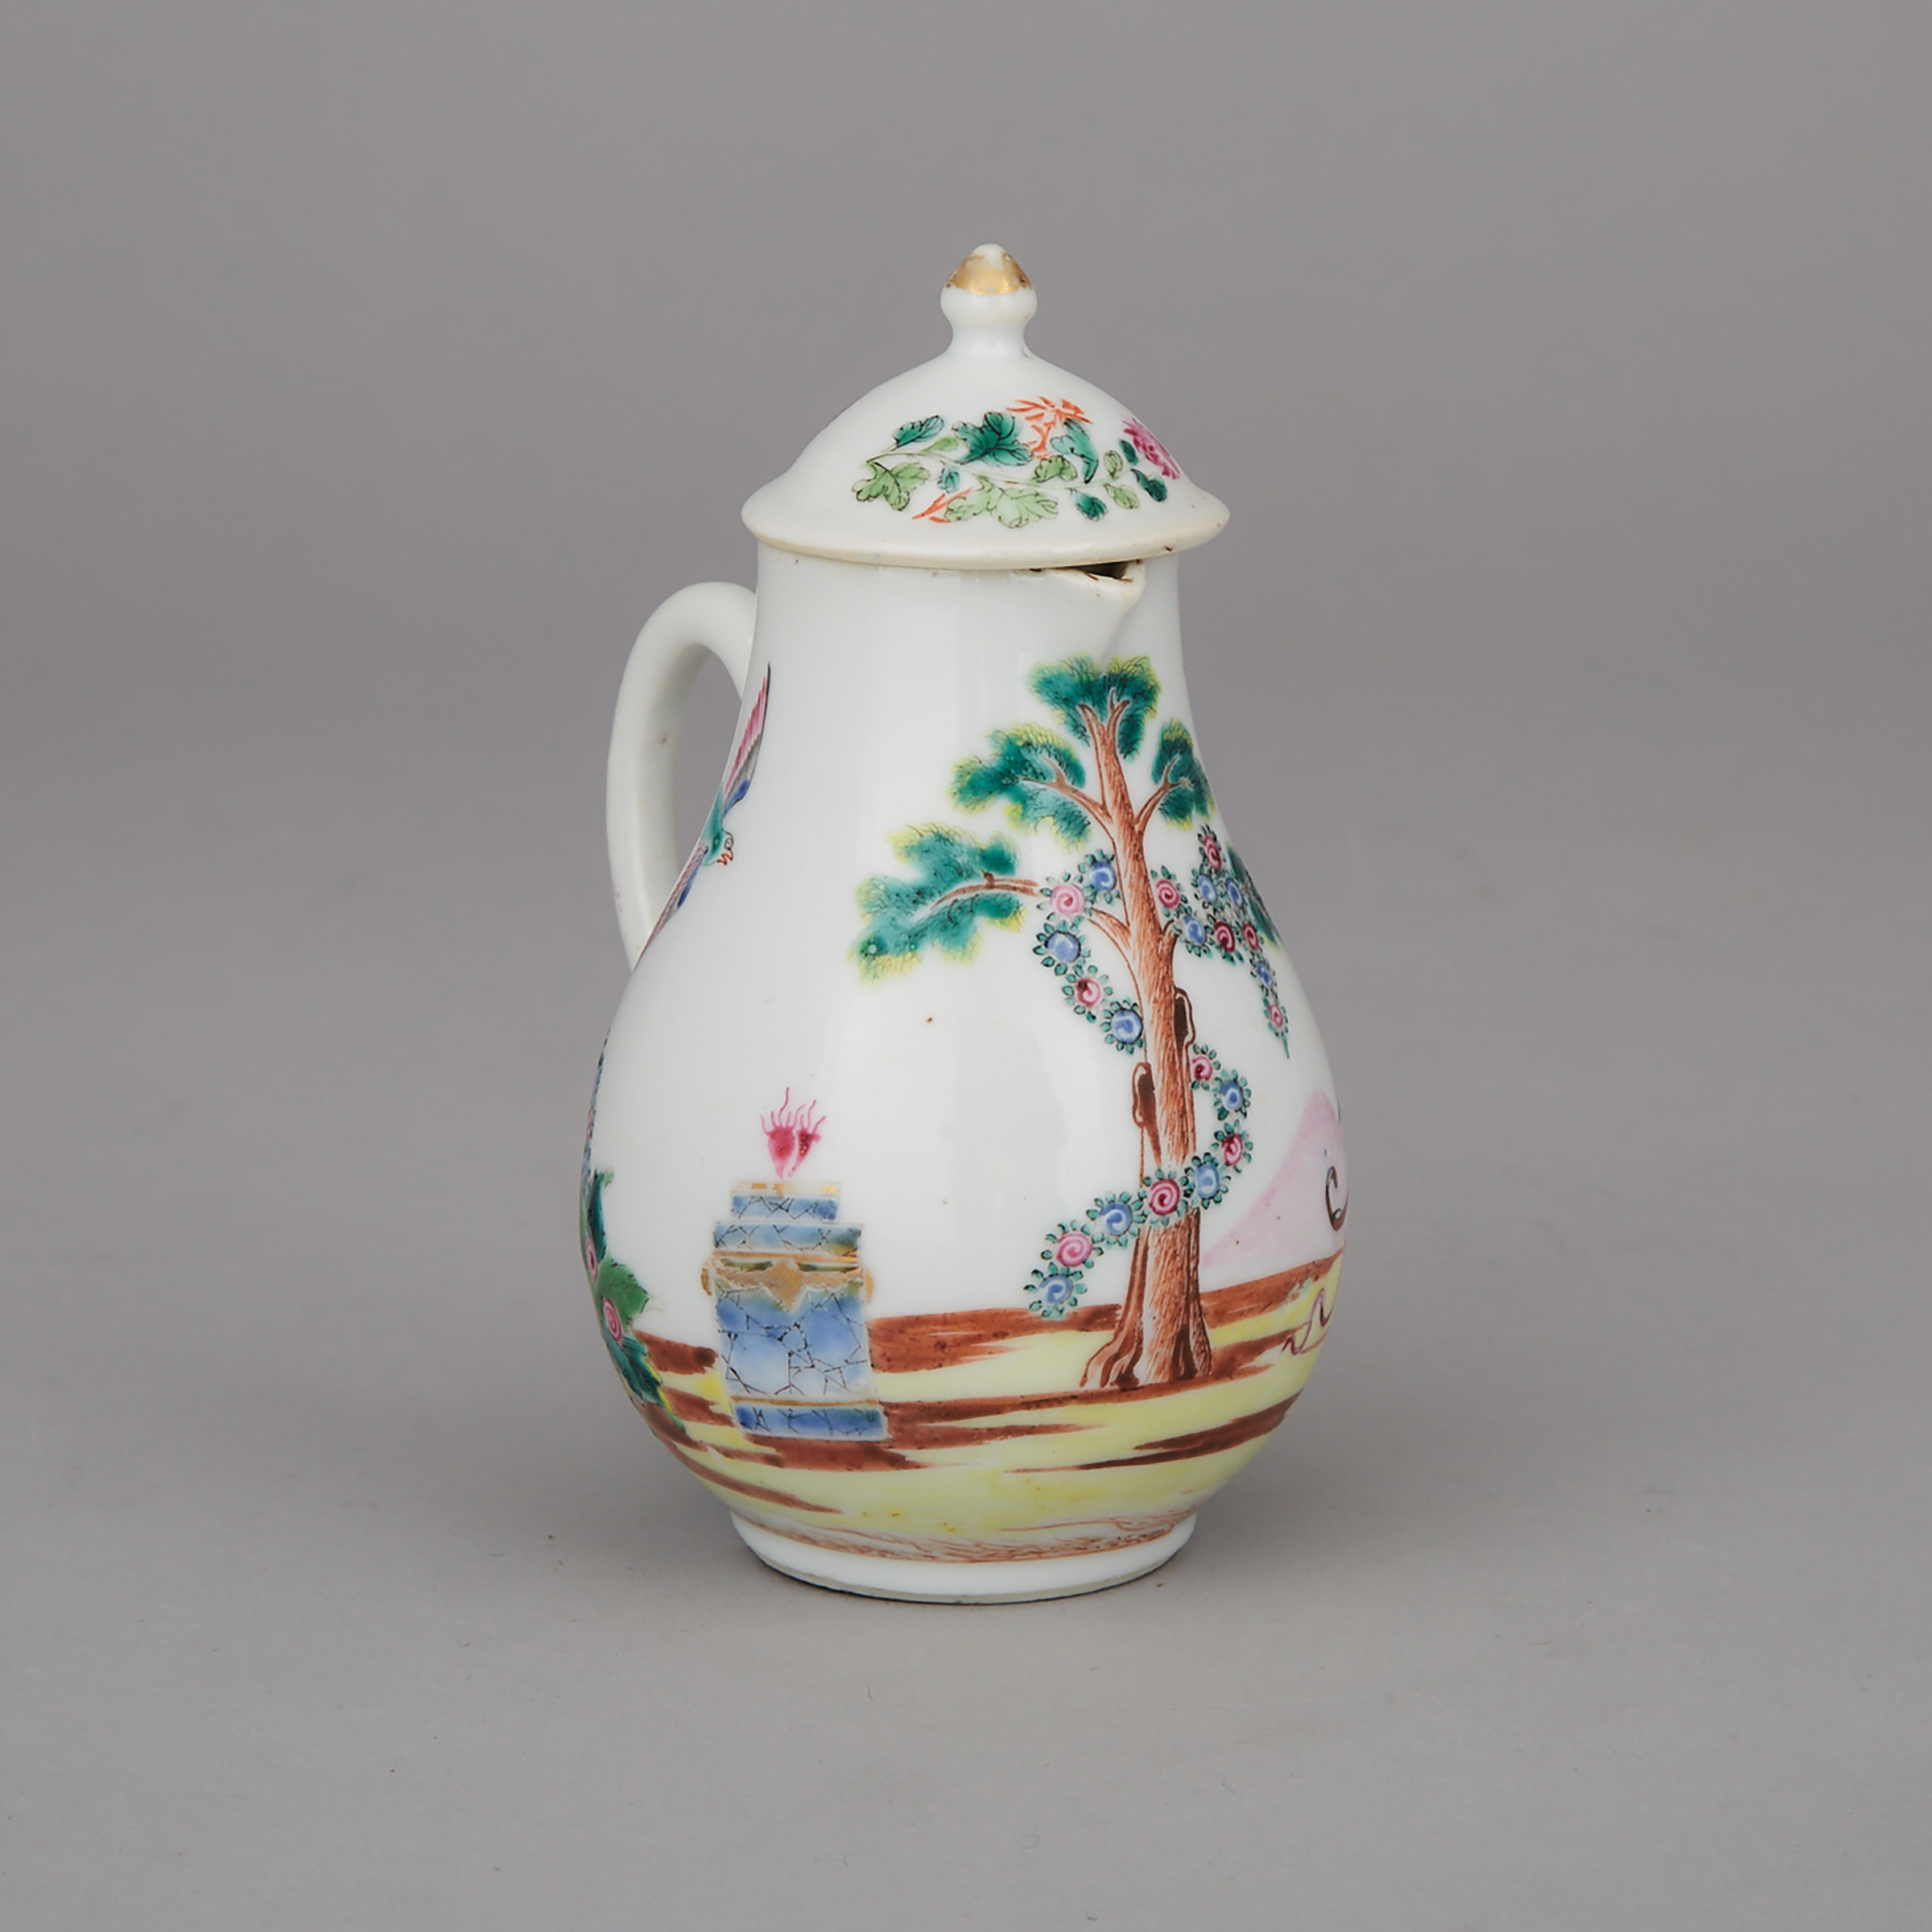 Chinese Export Porcelain ‘Valentine’ Pattern Covered Cream Jug, mid-18th century